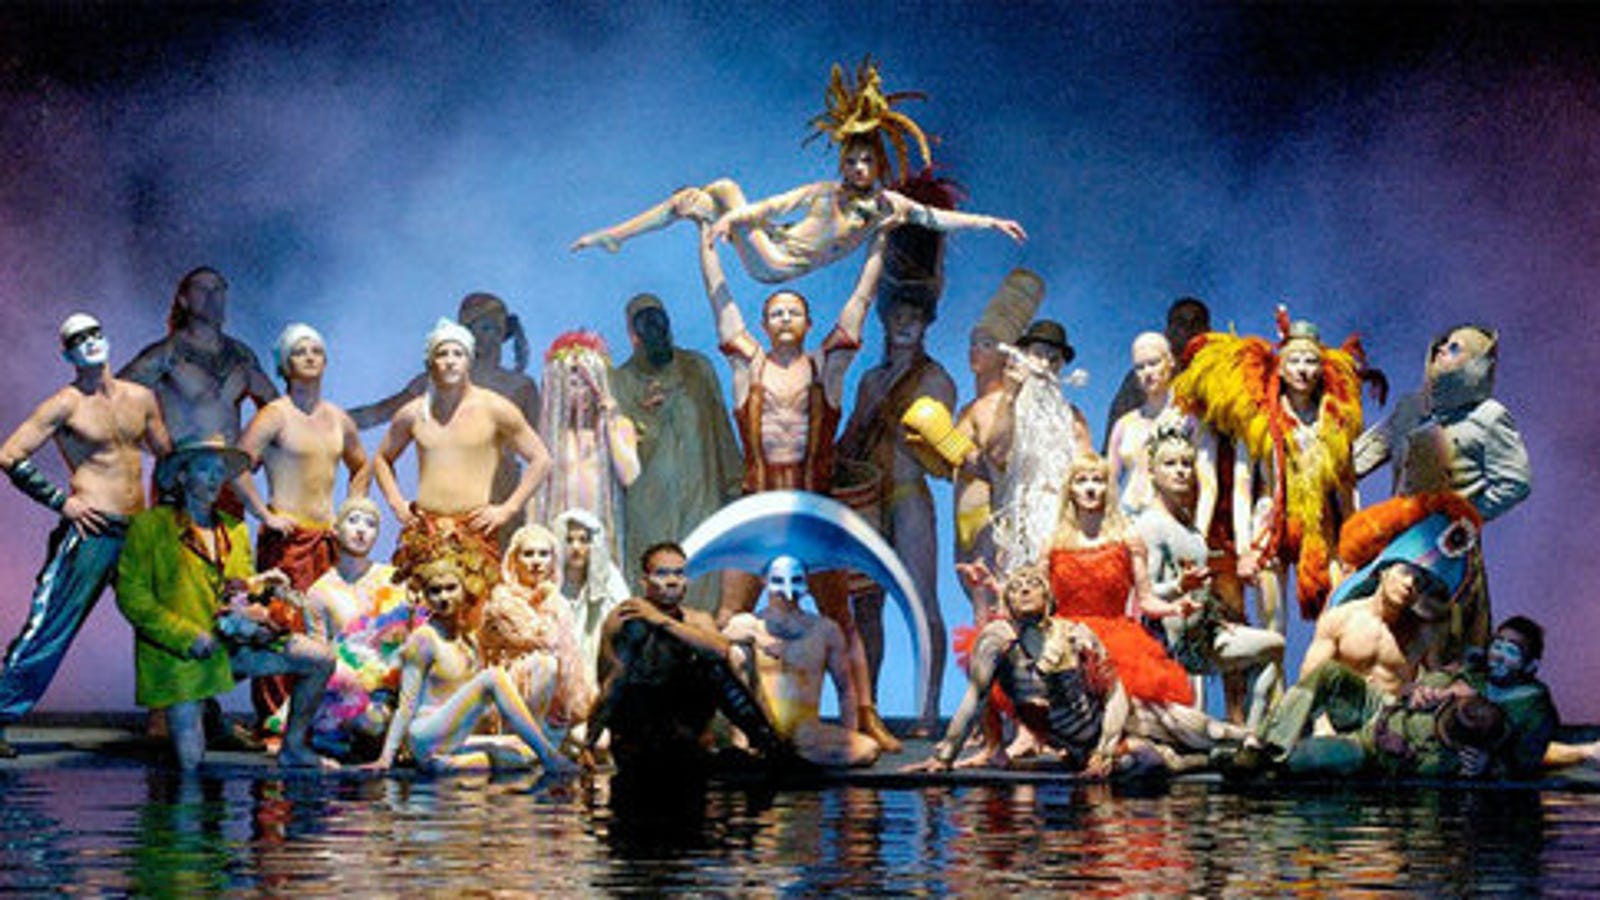 Every NiGHTS Fan Should See Cirque du Soleil's Mystère